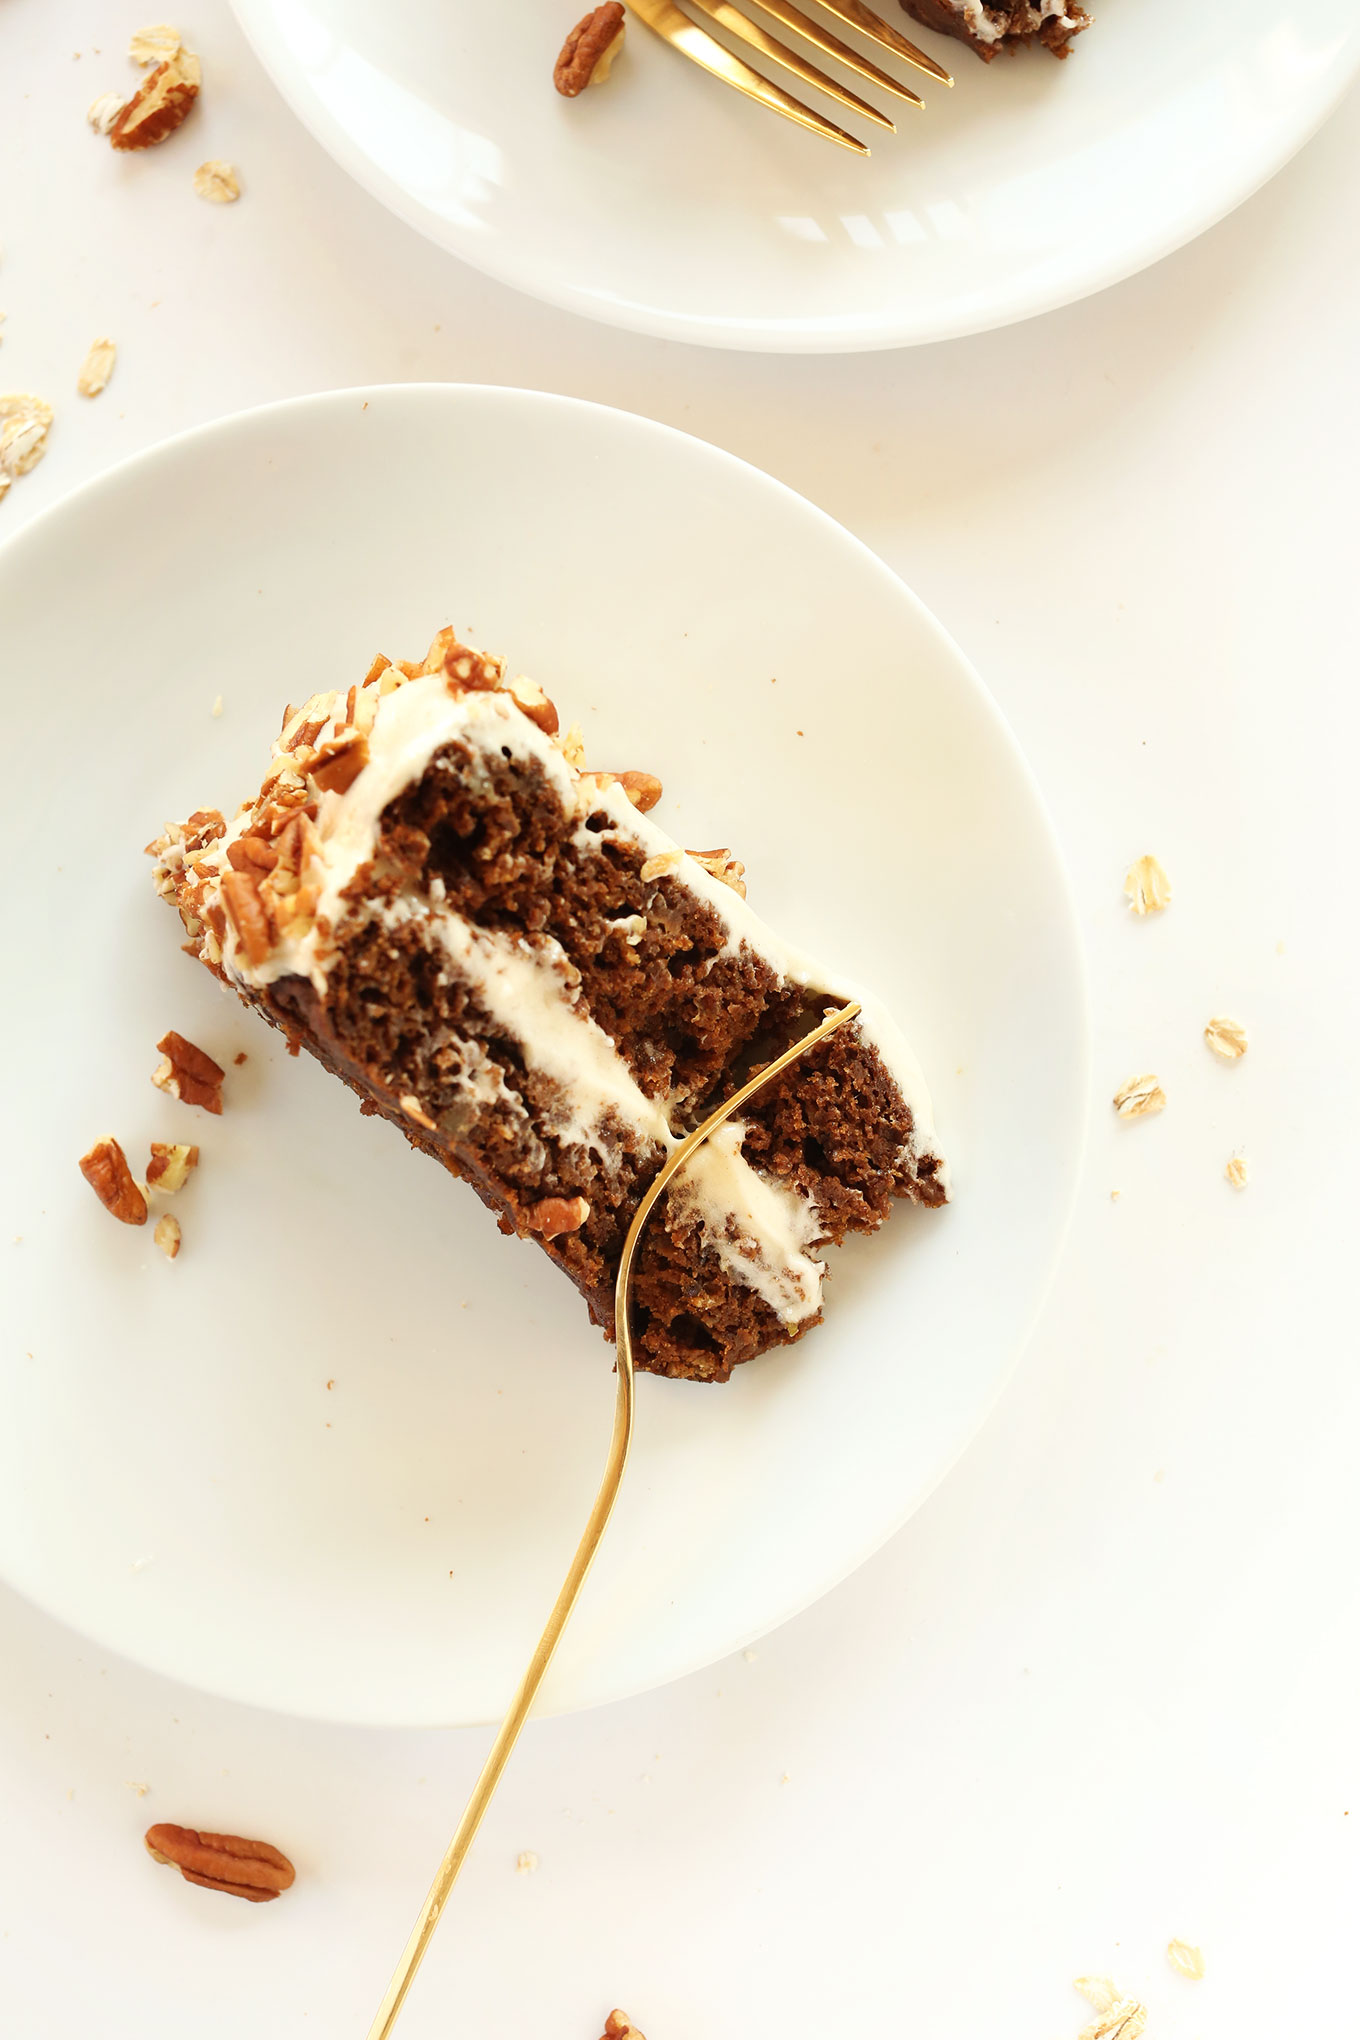 Using a fork to grab a bite of Apple Gingerbread Cake with Vegan Cream Cheese Frosting